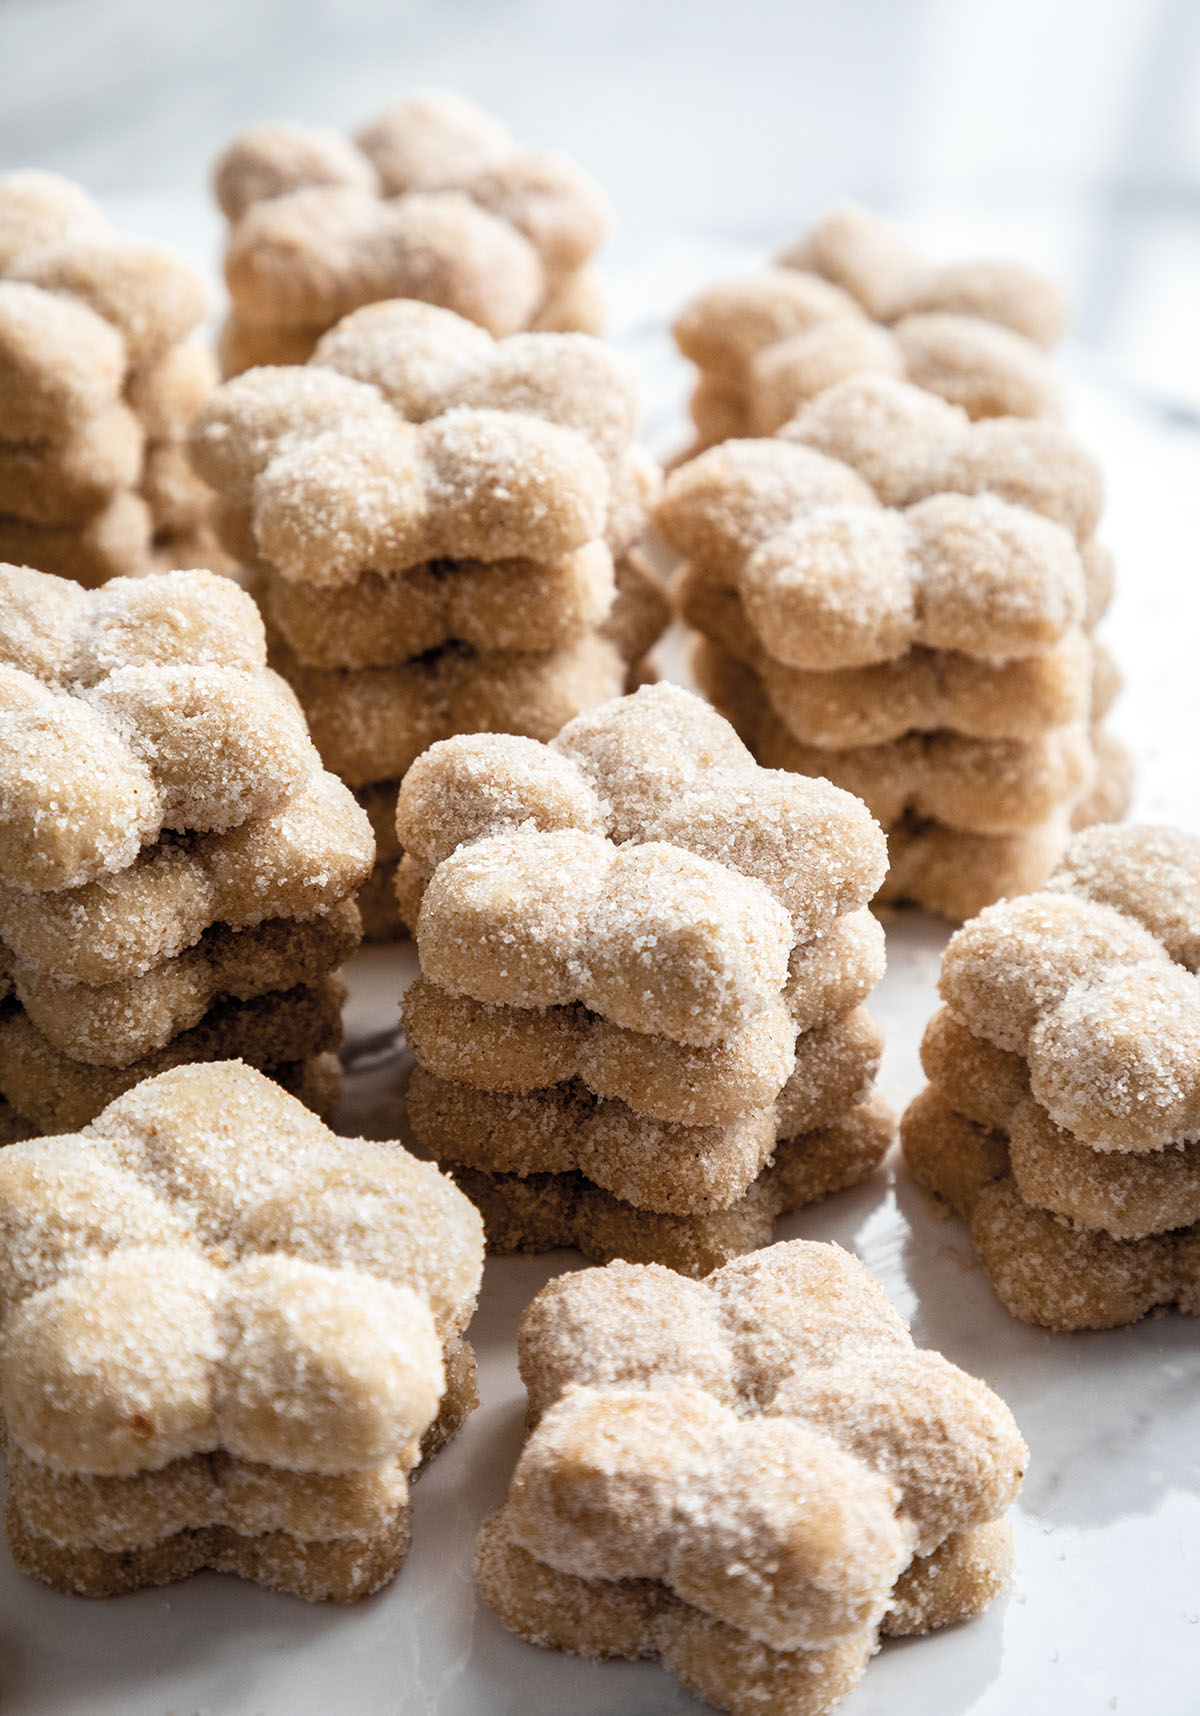 A stack of small tan cookies with cinnamon sugar